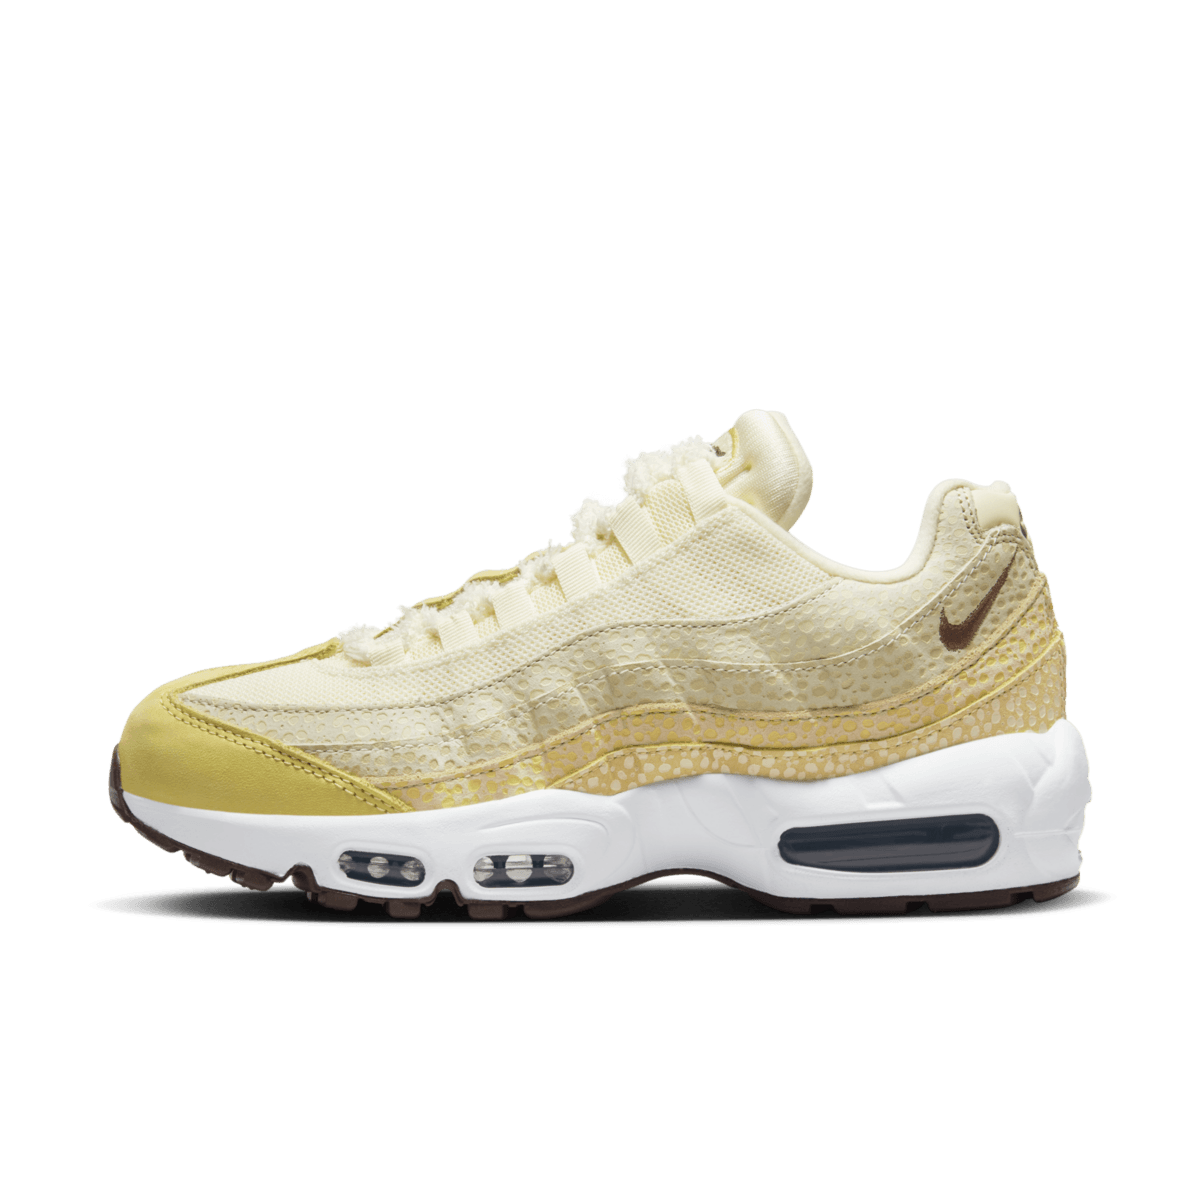 Nike Air Max 95 WMNS 'Saturn Gold and Alabaster' FD9857-700